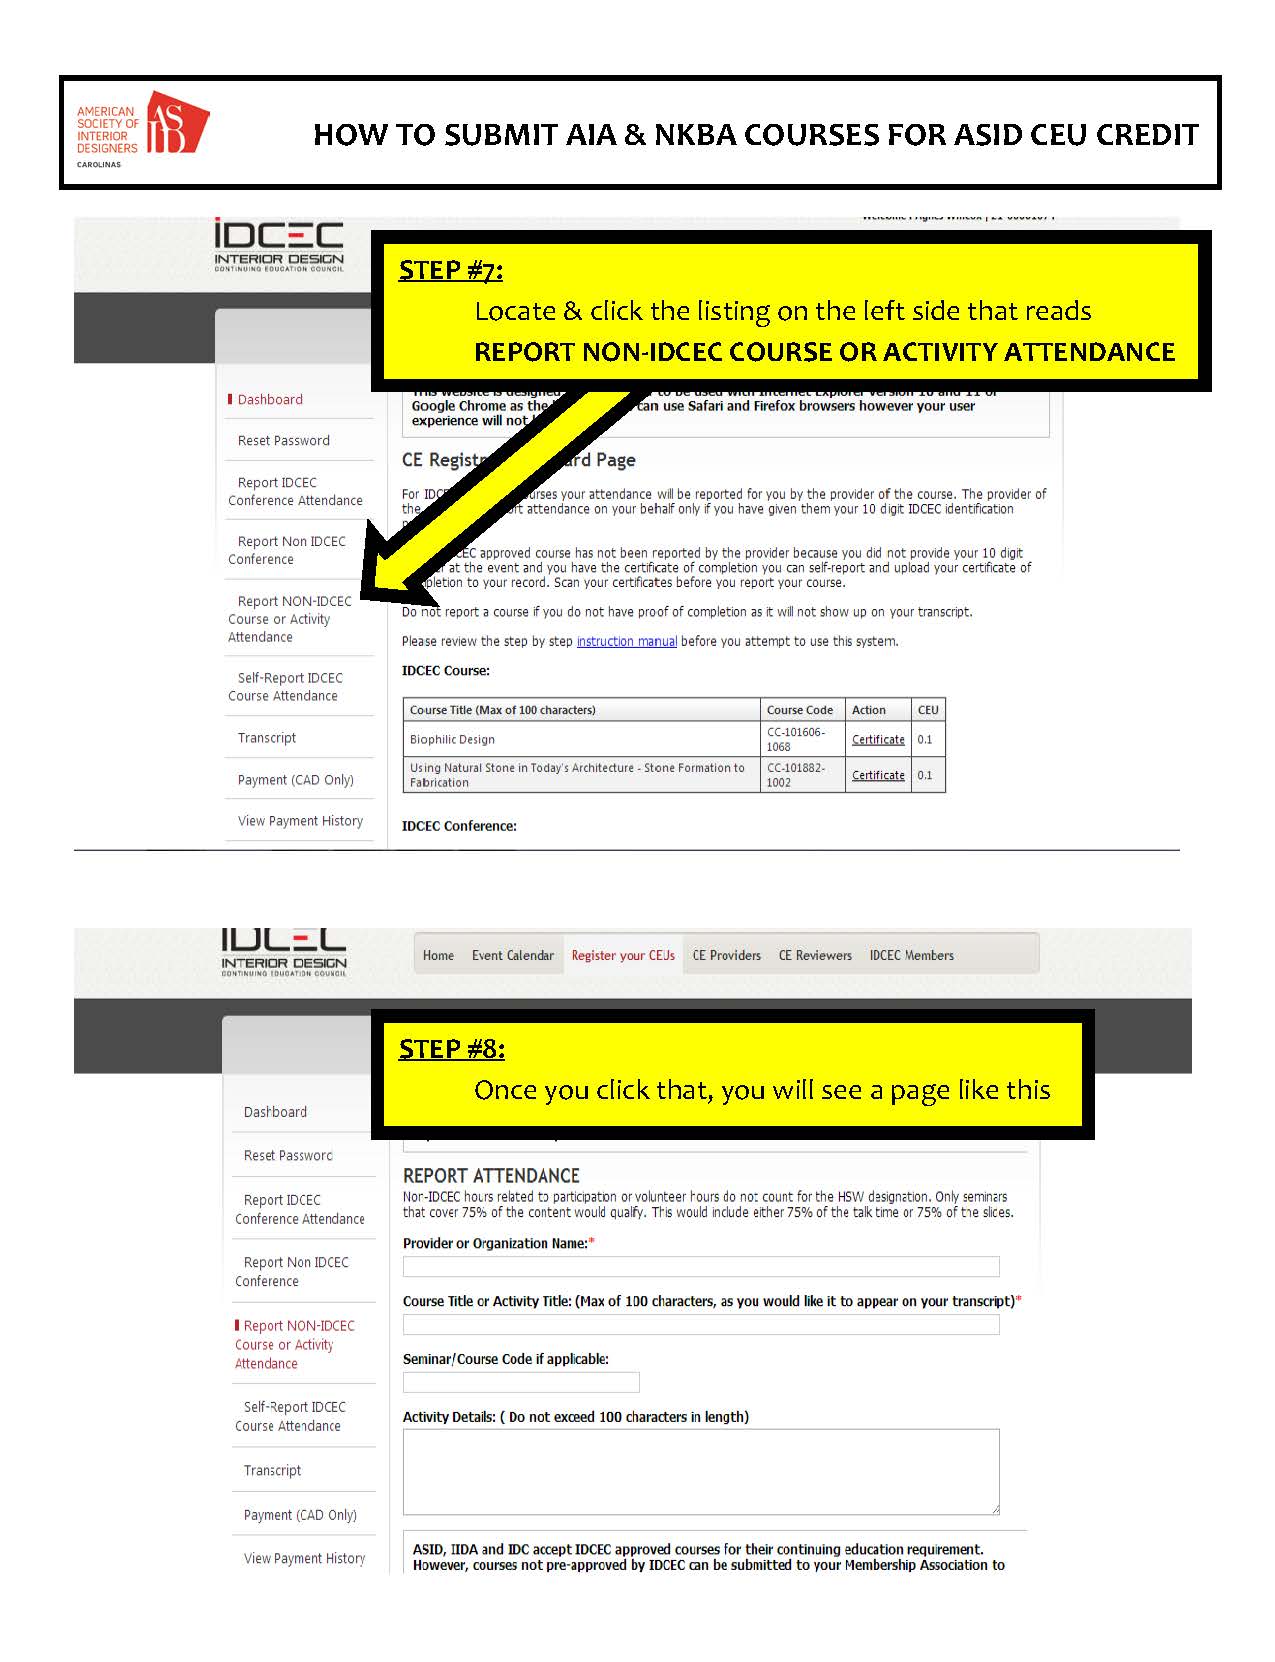 HOW TO SUBMIT AIA  NKBA COURSES FOR ASID CEU CREDIT Page 04